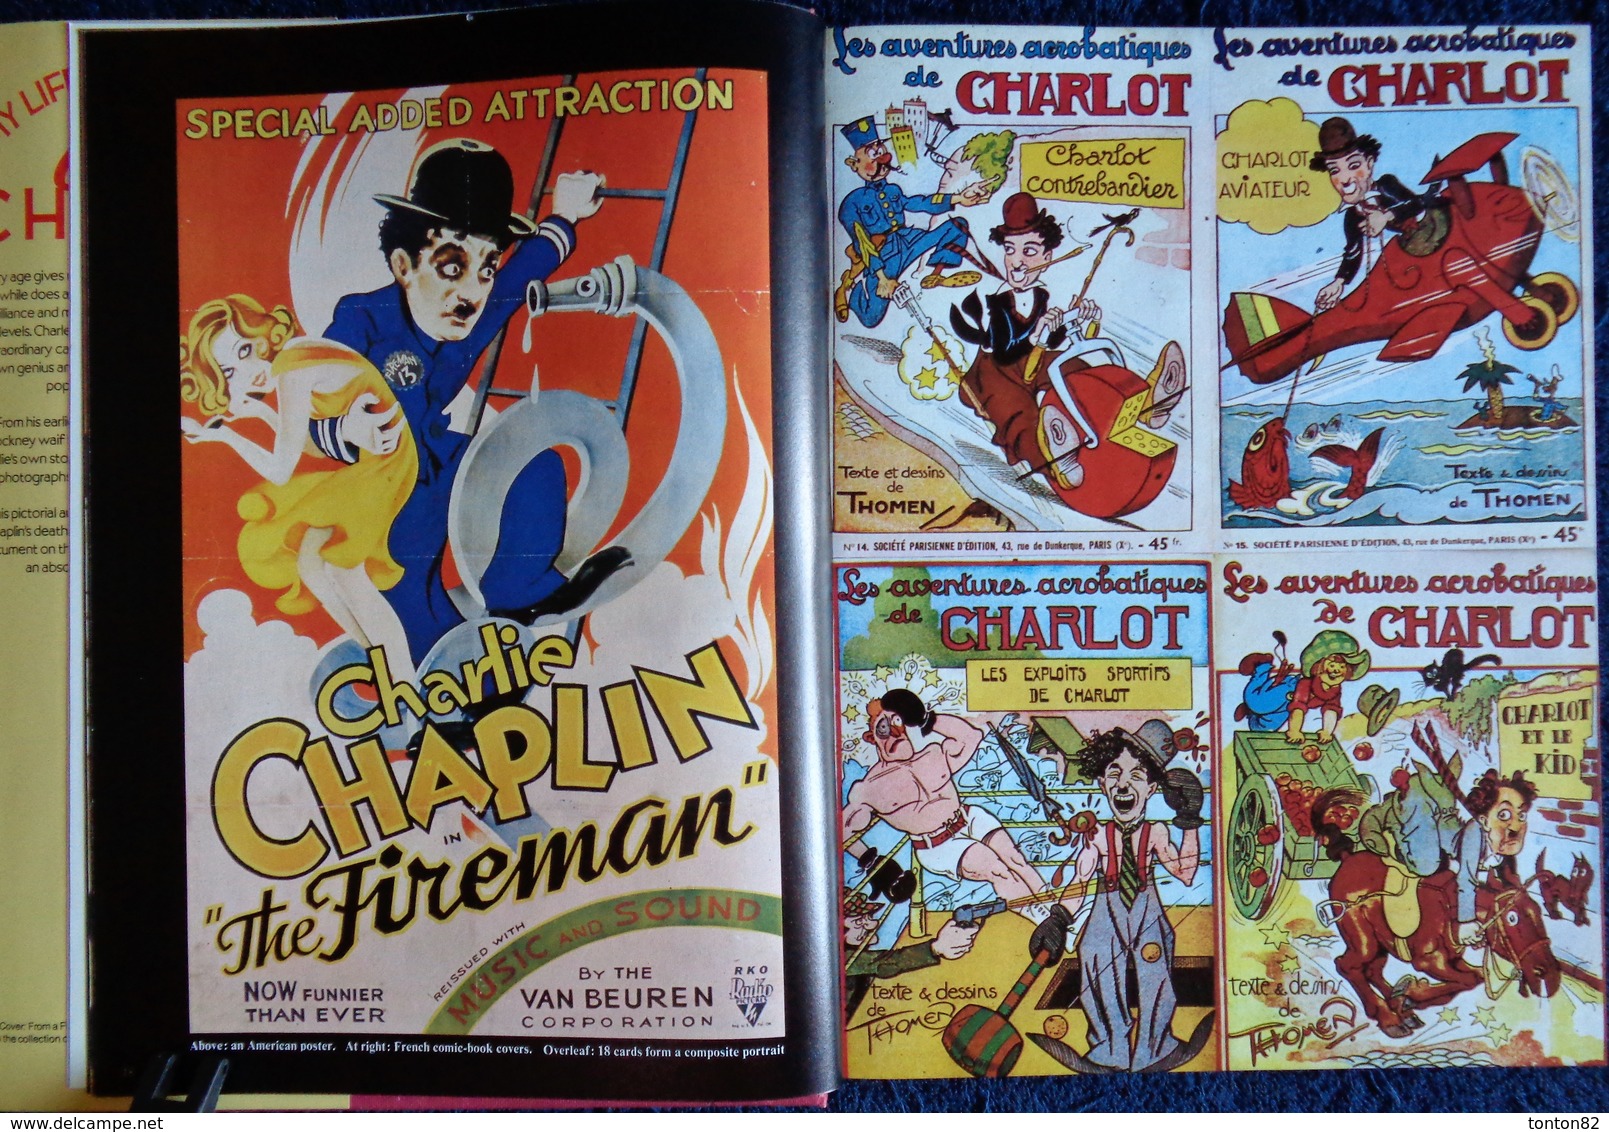 Charles CHAPLIN - My life in pictures - The Illustrated Story Of A Comic Genius - Peerage Books - ( 1985 ) .